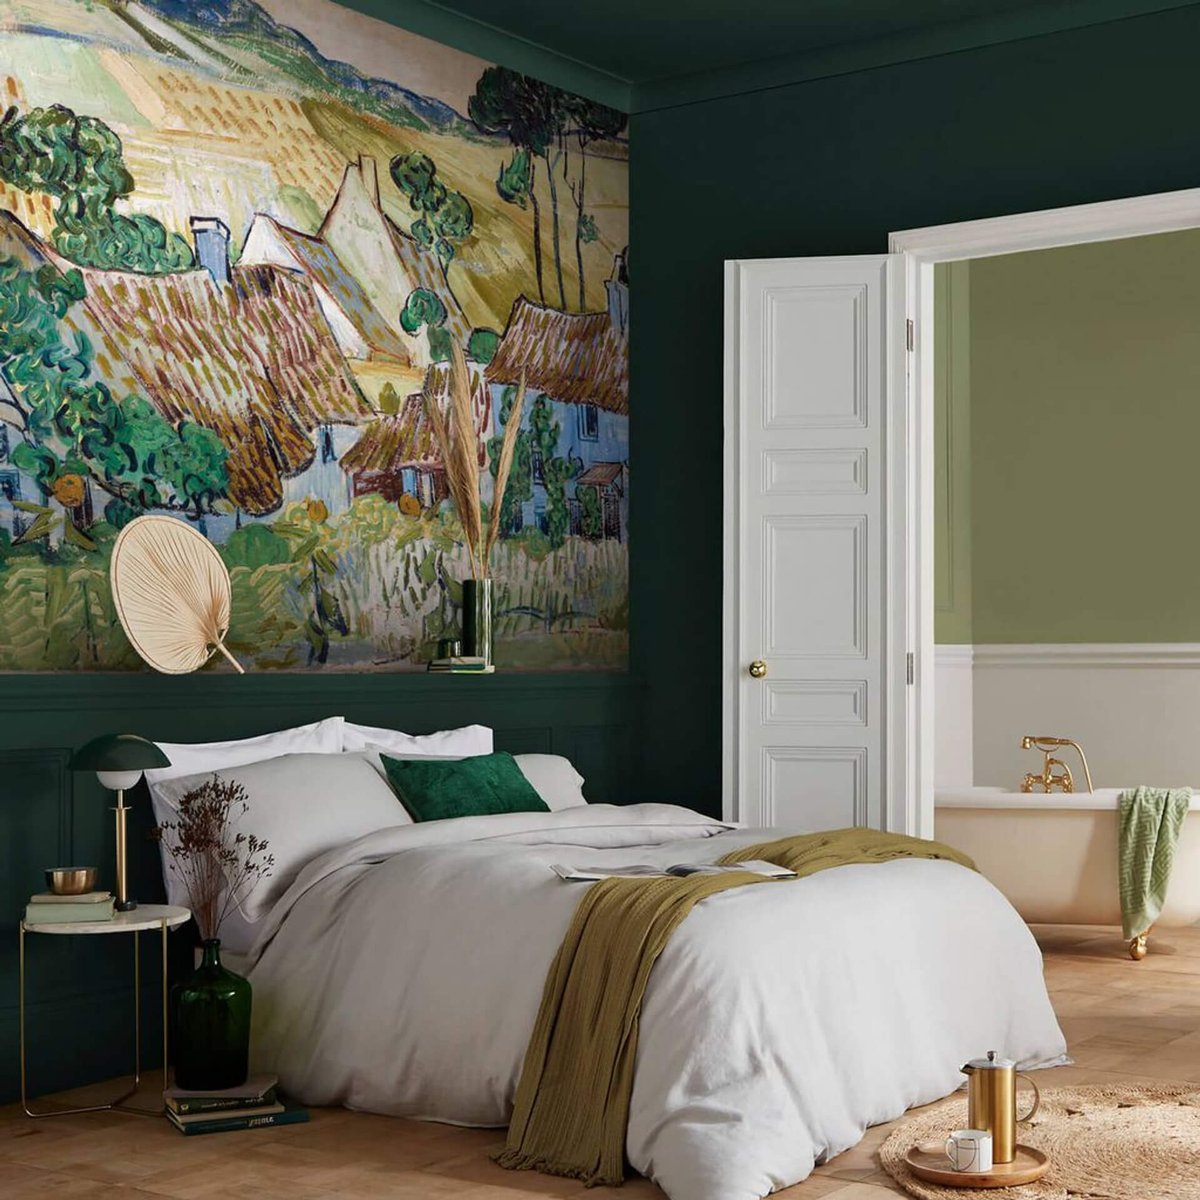 Beyond the Brush: Exploring #RoomWall Painting Possibilities
tinyurl.com/y6ufye25
#wallpaint #paintcolor #colorcombination #realestate #makeover #construction #SaturdayMorning #SaturdayVibes  
#wallpainting #Beautiful #Wallcolor #Elegance #BeautifulWalls #Paint #PaintYourWalls